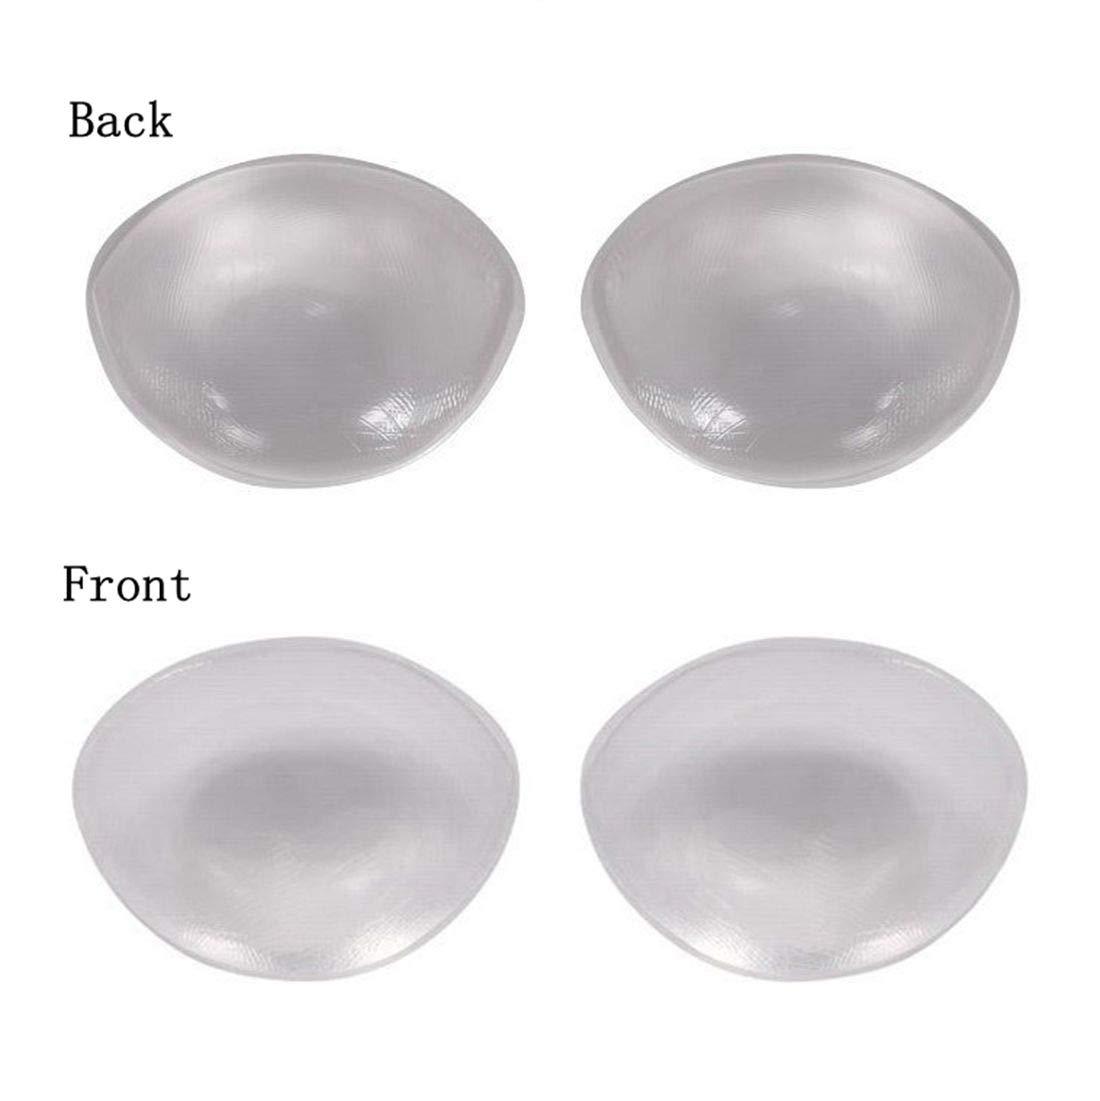 V-XC001 Transparent Silicone Gel Bra Inserts Push Up Silicone Bra Pads  Swimsuit Removable Bra Inserts at Rs 1545.62, Silicone Bra